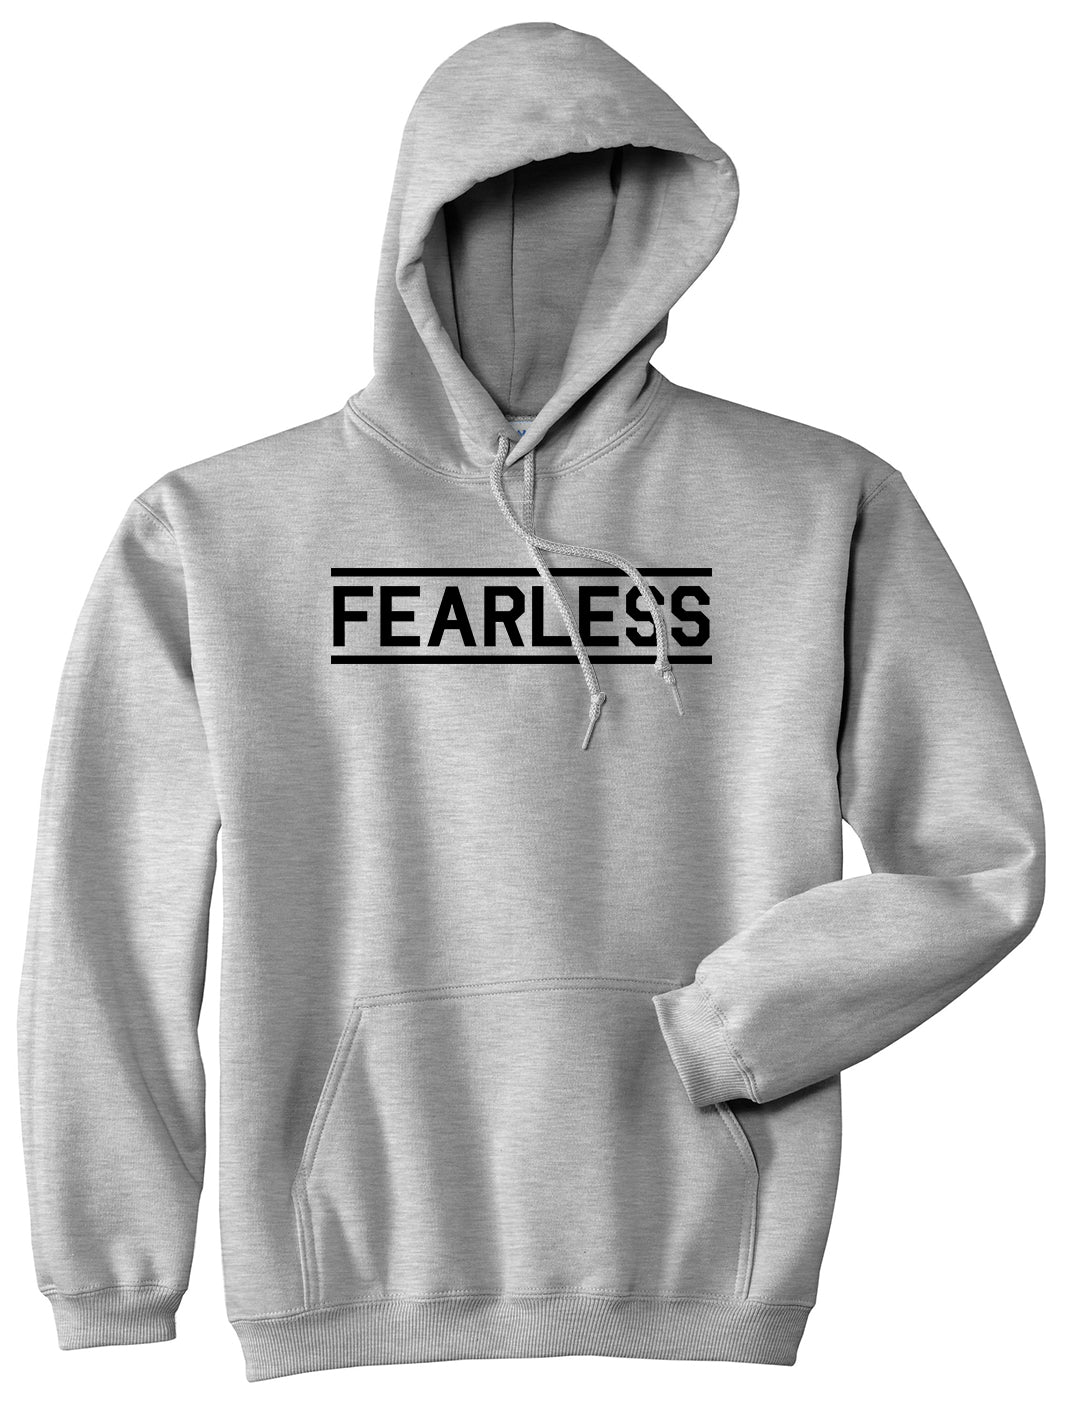 Fearless Gym Mens Grey Pullover Hoodie by KINGS OF NY